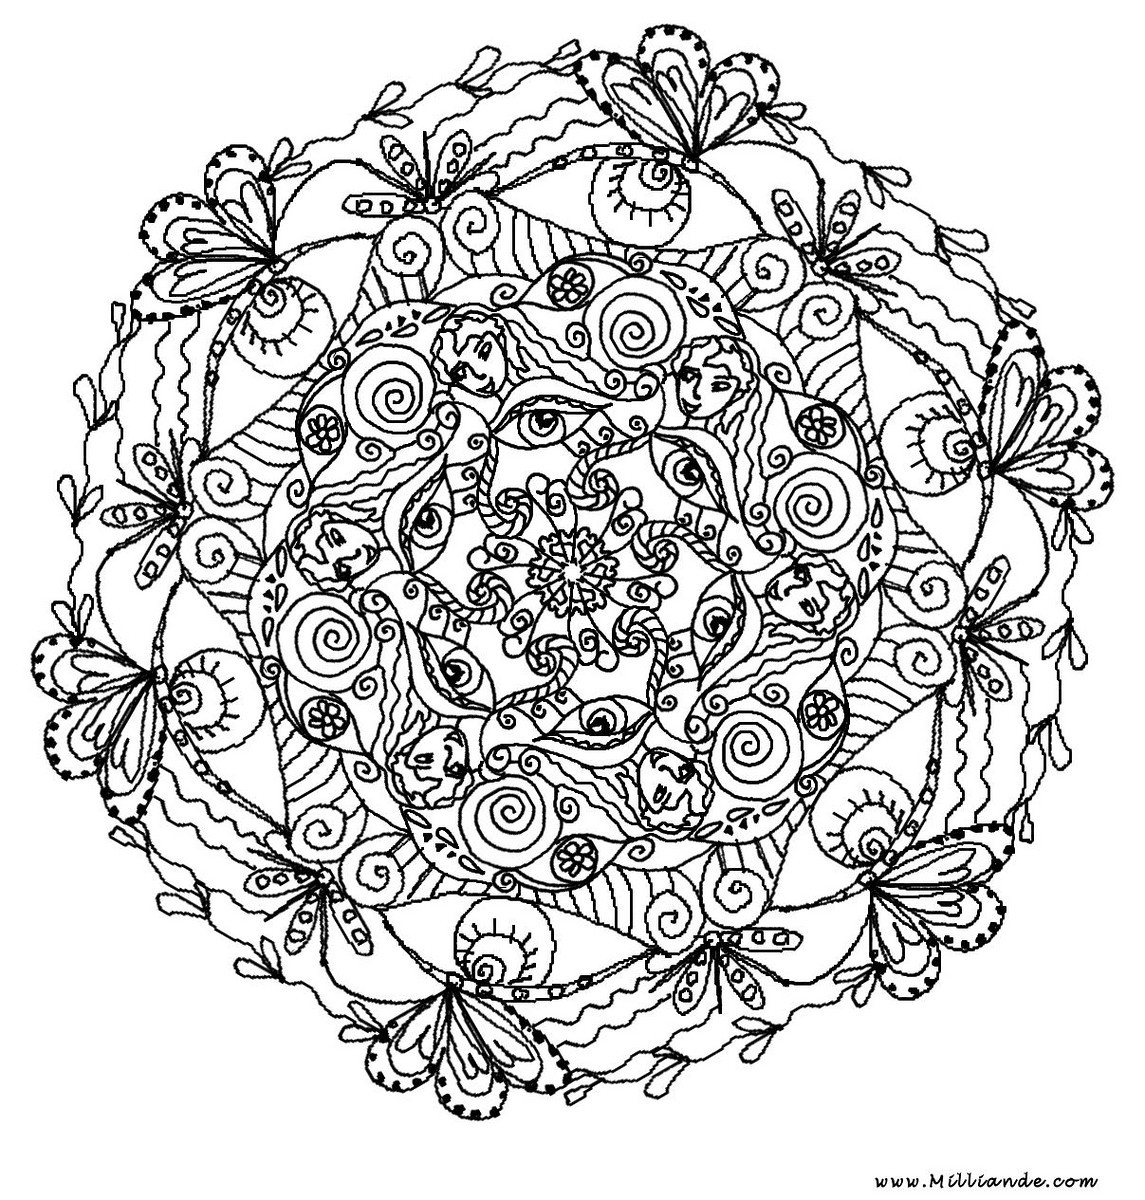  Free Coloring Pages For Adults – letscoloringpages.com – butterfly